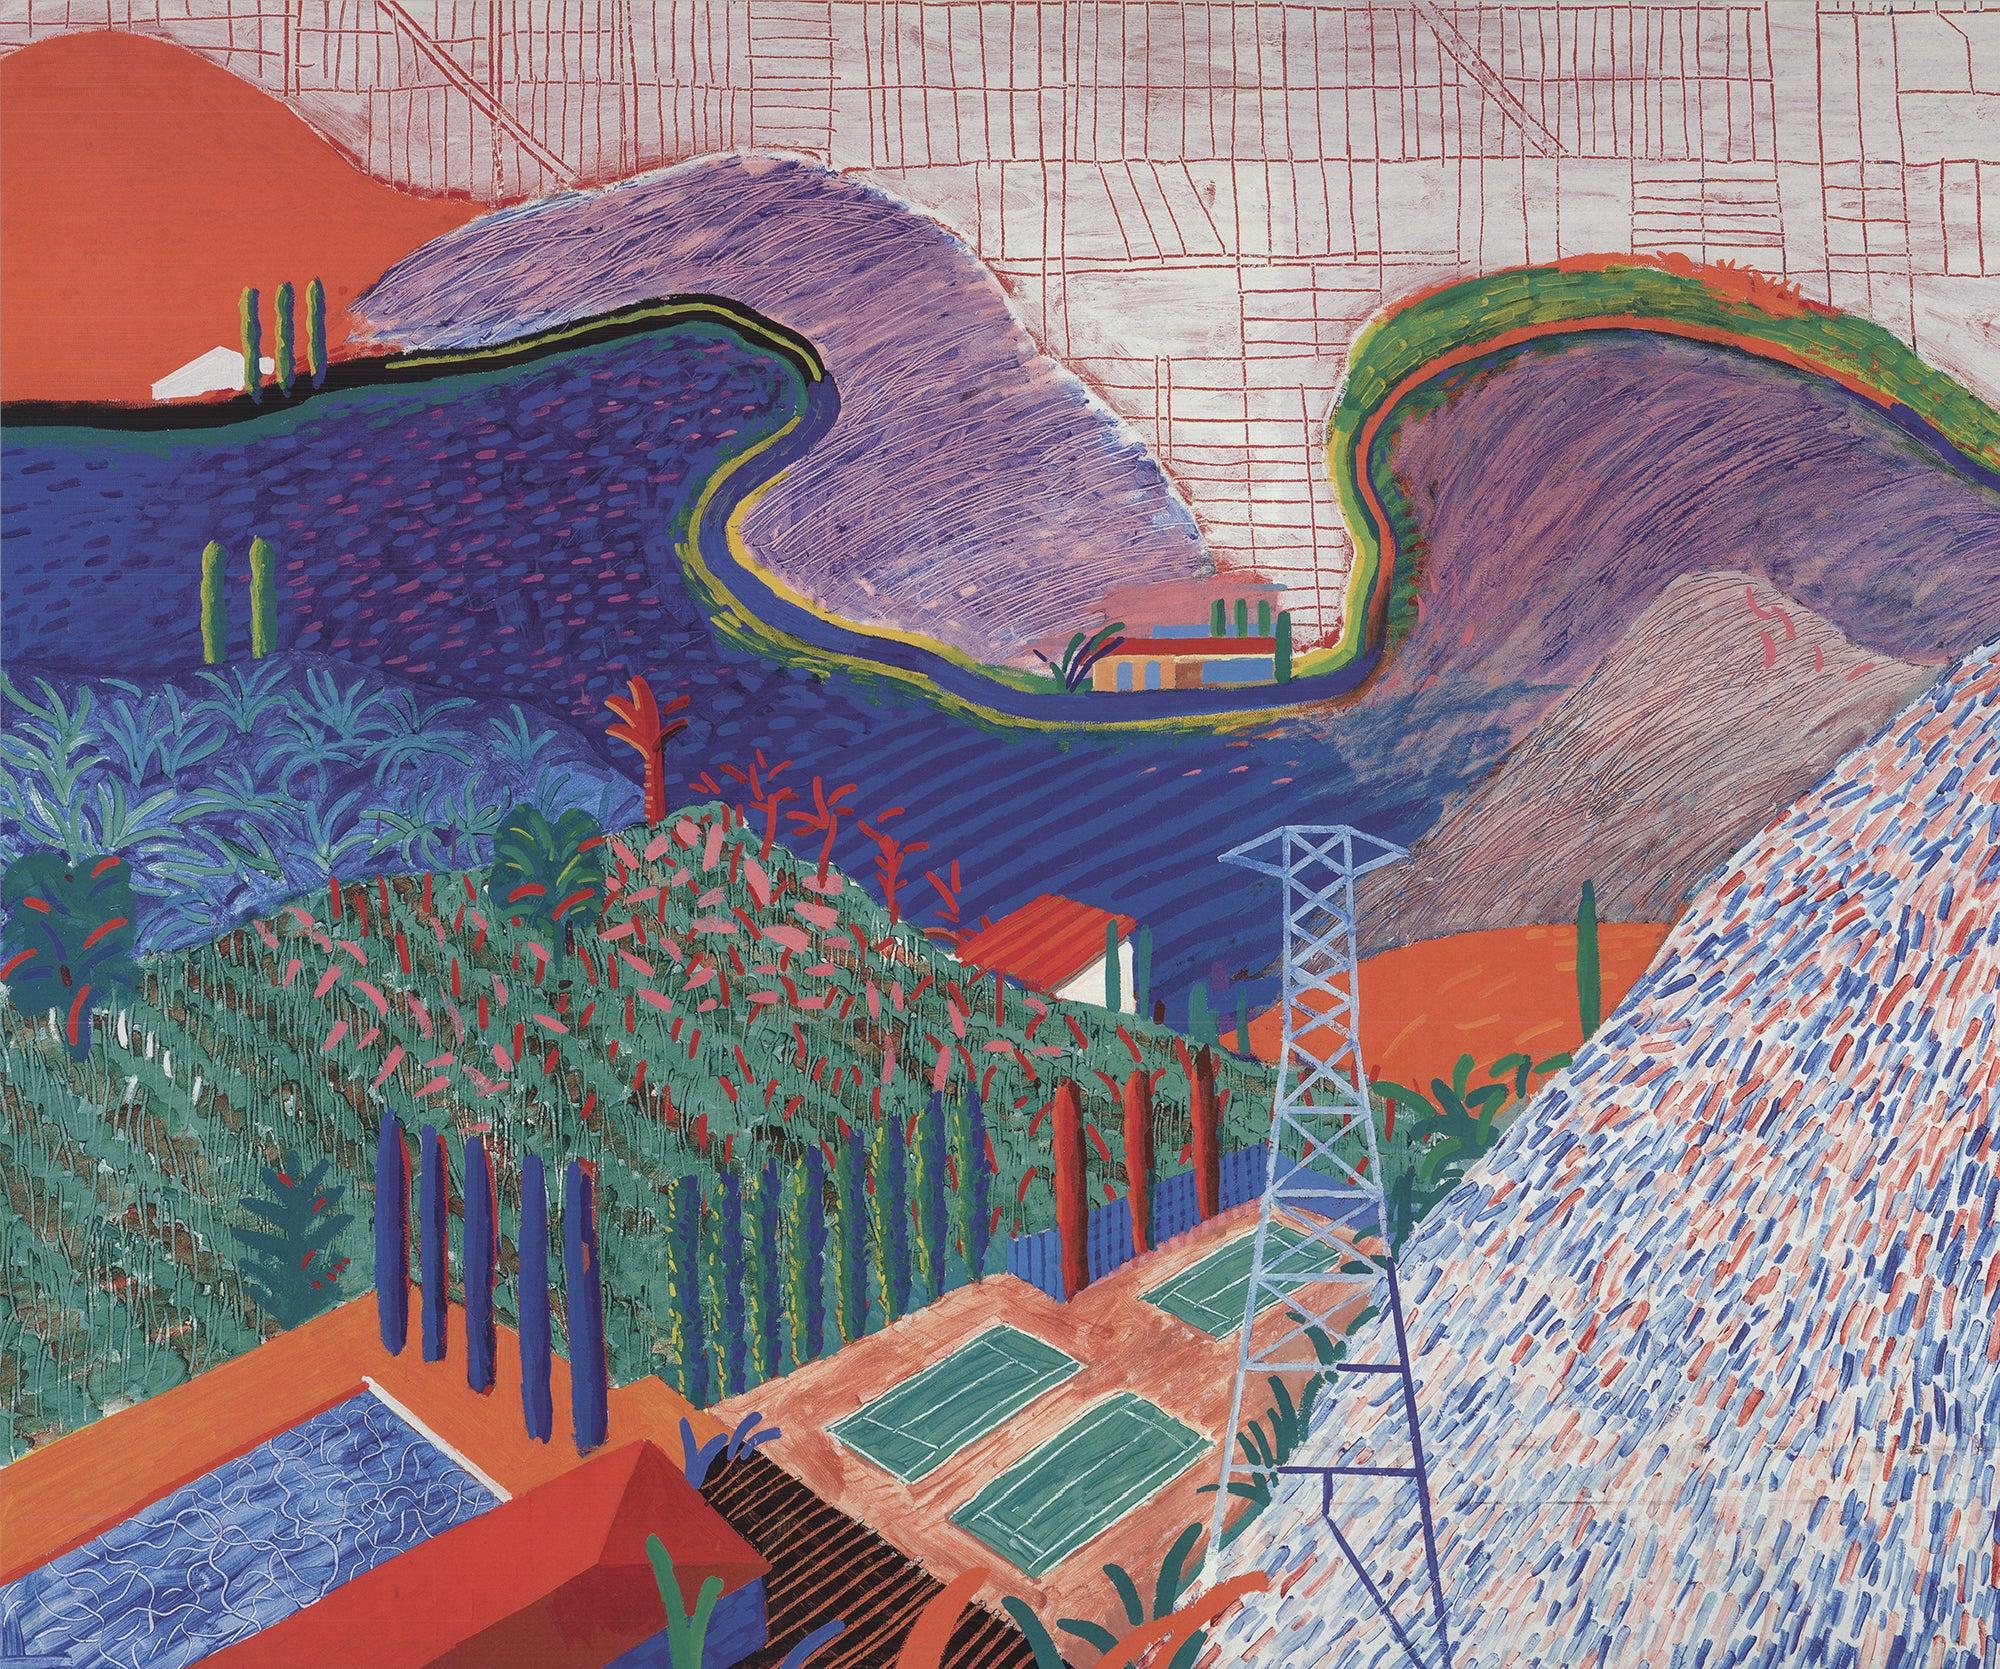 David Hockney „Mulholland Drive: The Road to the Studio“ 2021- Offset-Lithographie im Angebot 1